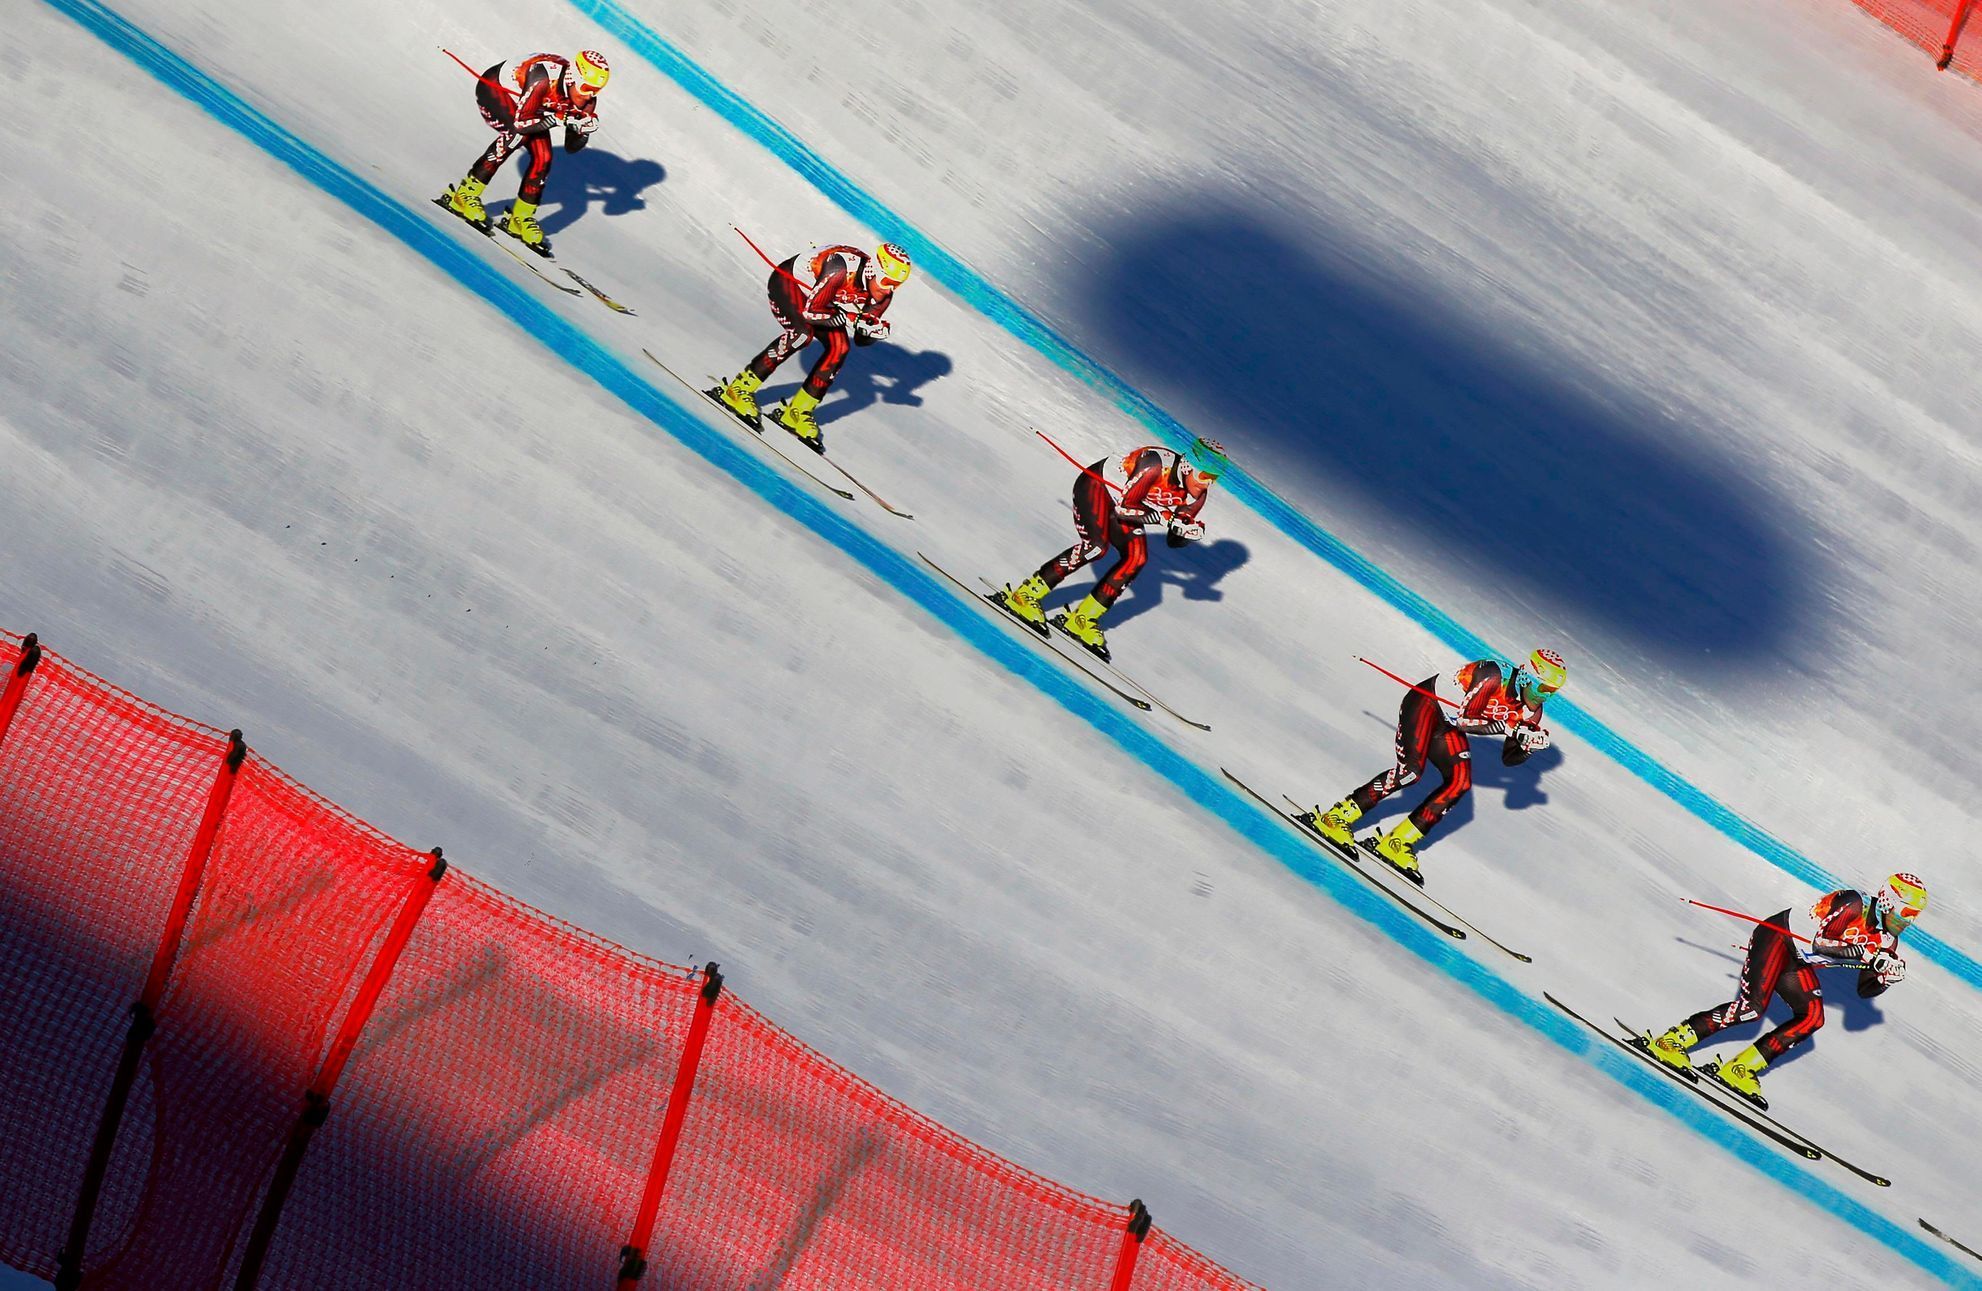 Croatia's Kostelic speeds down the course during the downhill run of the men's alpine skiing super combined training session at the 2014 Sochi Winter Olympics